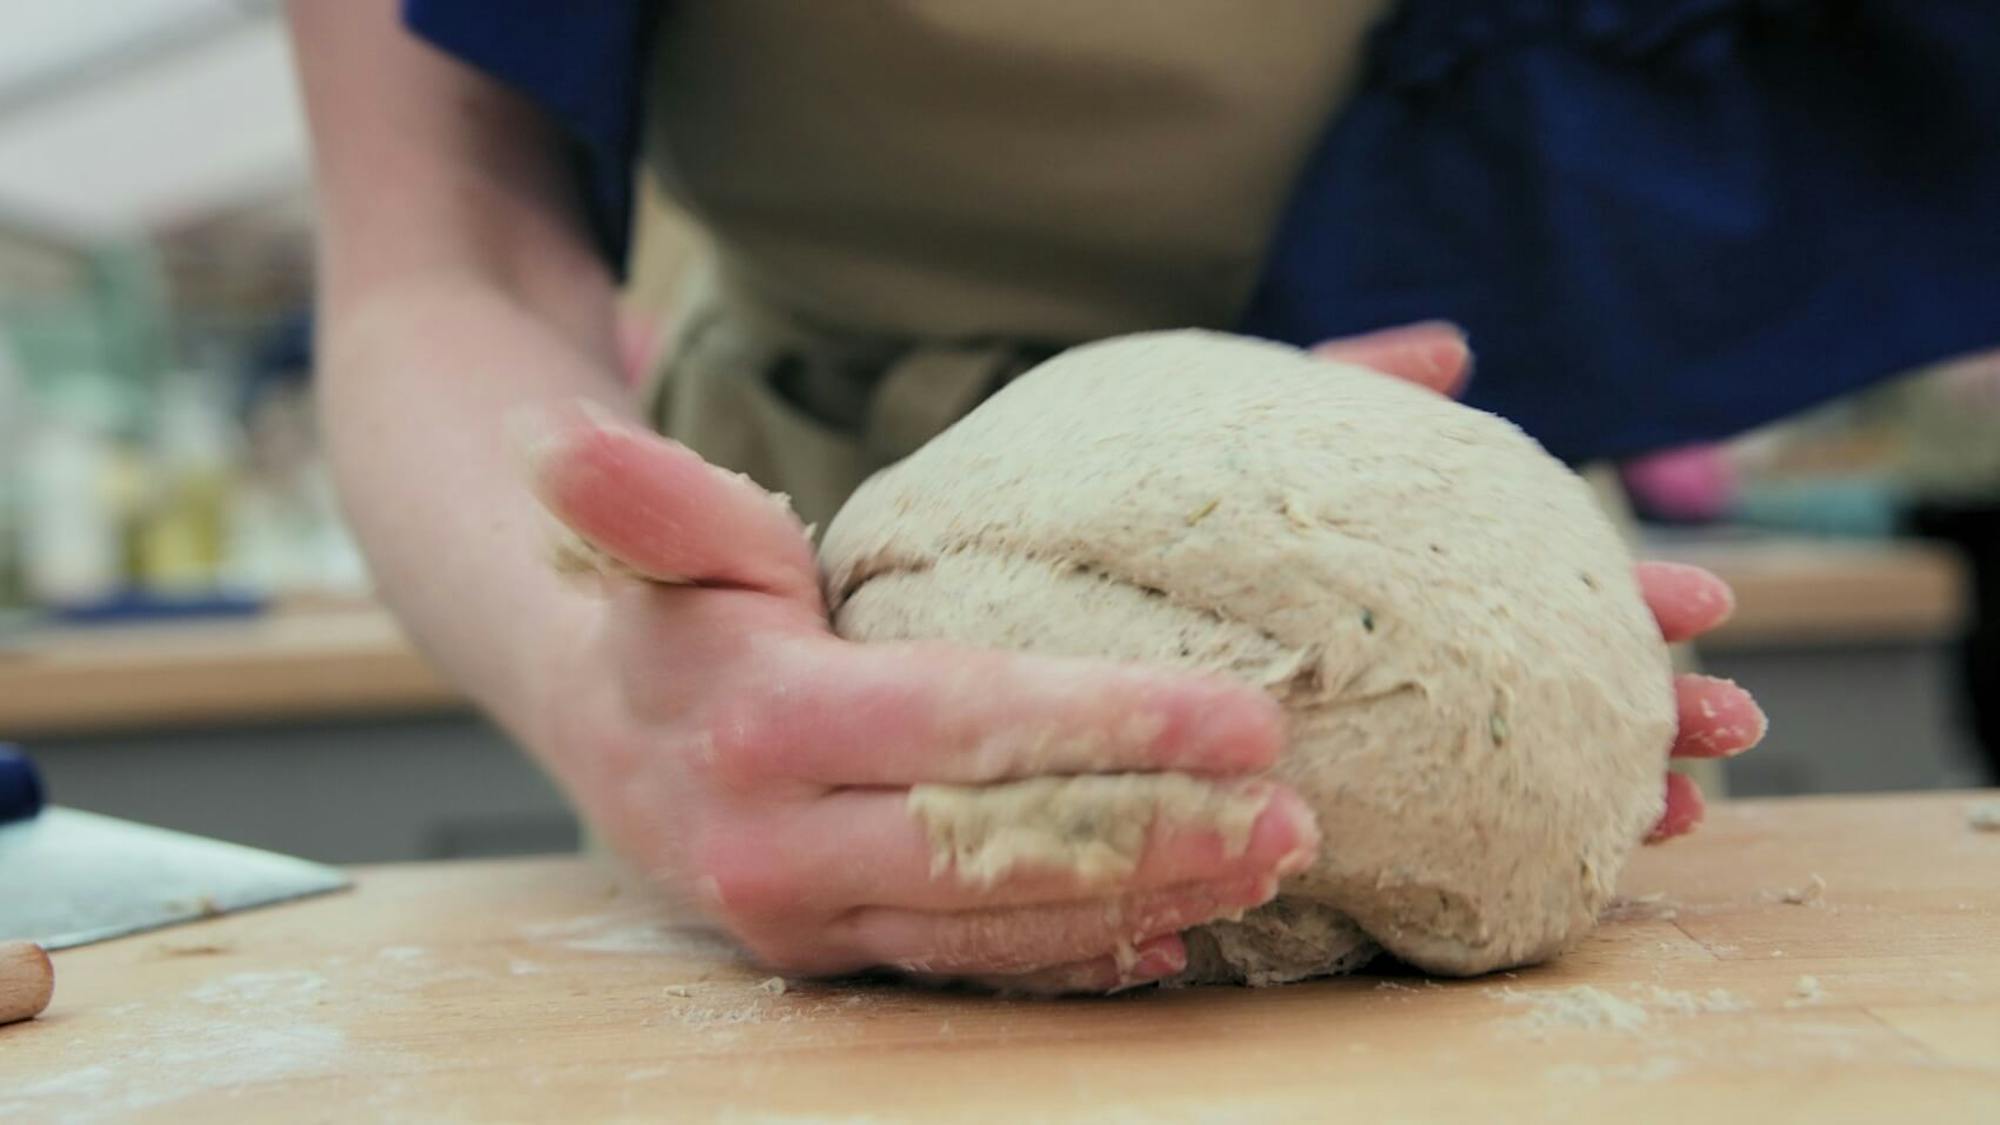 A pair of hands knead a ball of dough. The shot gives the sense of movement, motion, and speed. The person to whom the hands belong wears a khaki apron.